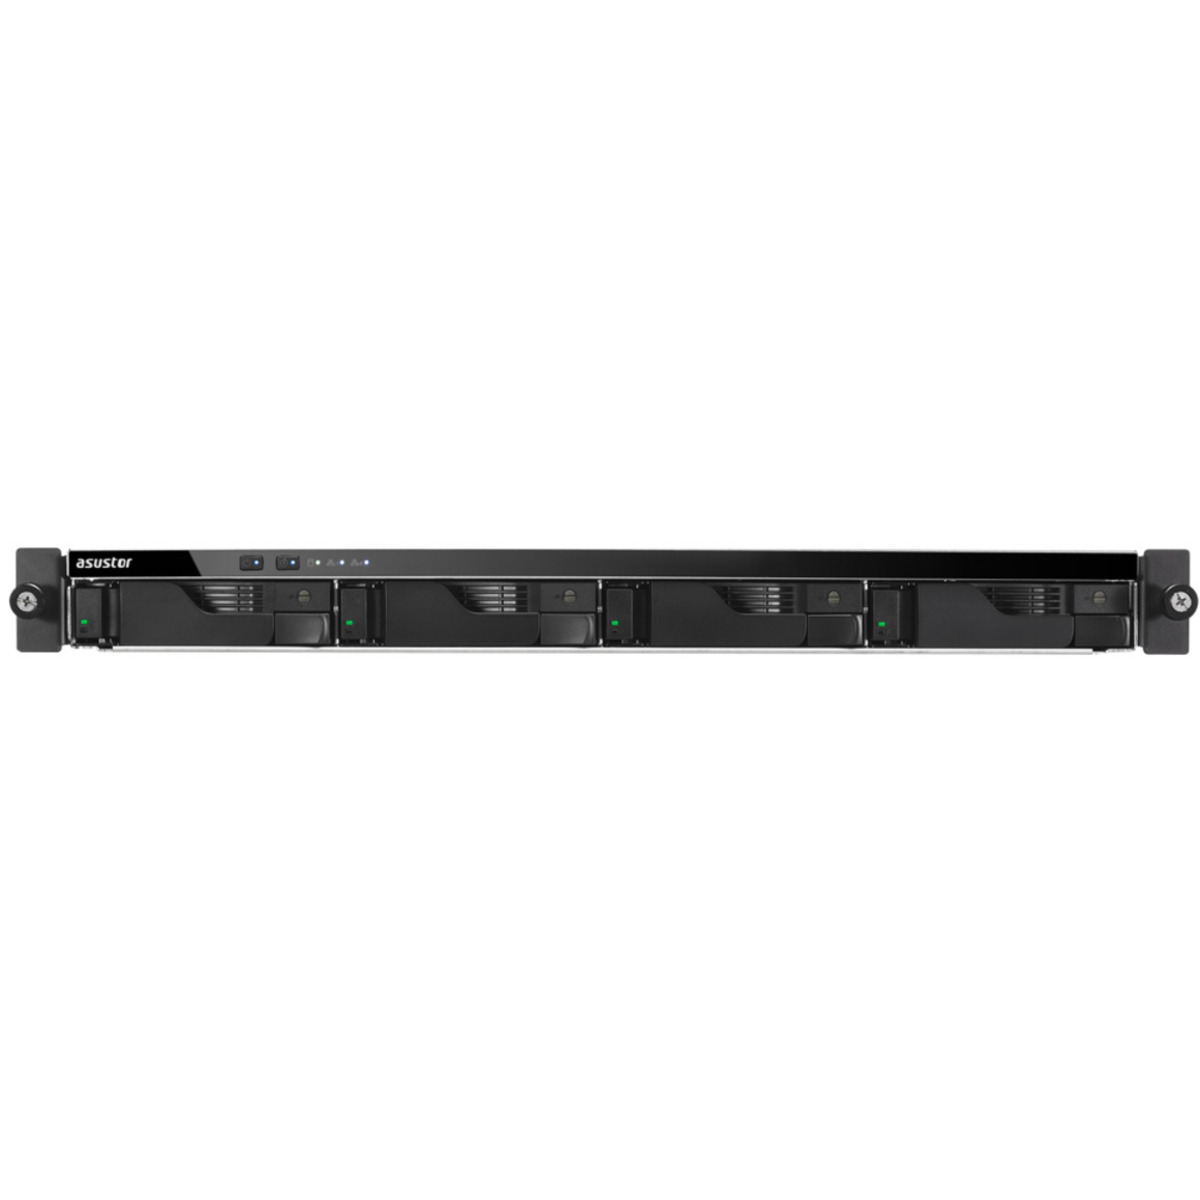 ASUSTOR LOCKERSTOR 4RD AS6504RD 36tb 4-Bay RackMount Multimedia / Power User / Business NAS - Network Attached Storage Device 2x18tb Western Digital Ultrastar DC HC550 WUH721818ALE6L4 3.5 7200rpm SATA 6Gb/s HDD ENTERPRISE Class Drives Installed - Burn-In Tested - FREE RAM UPGRADE LOCKERSTOR 4RD AS6504RD